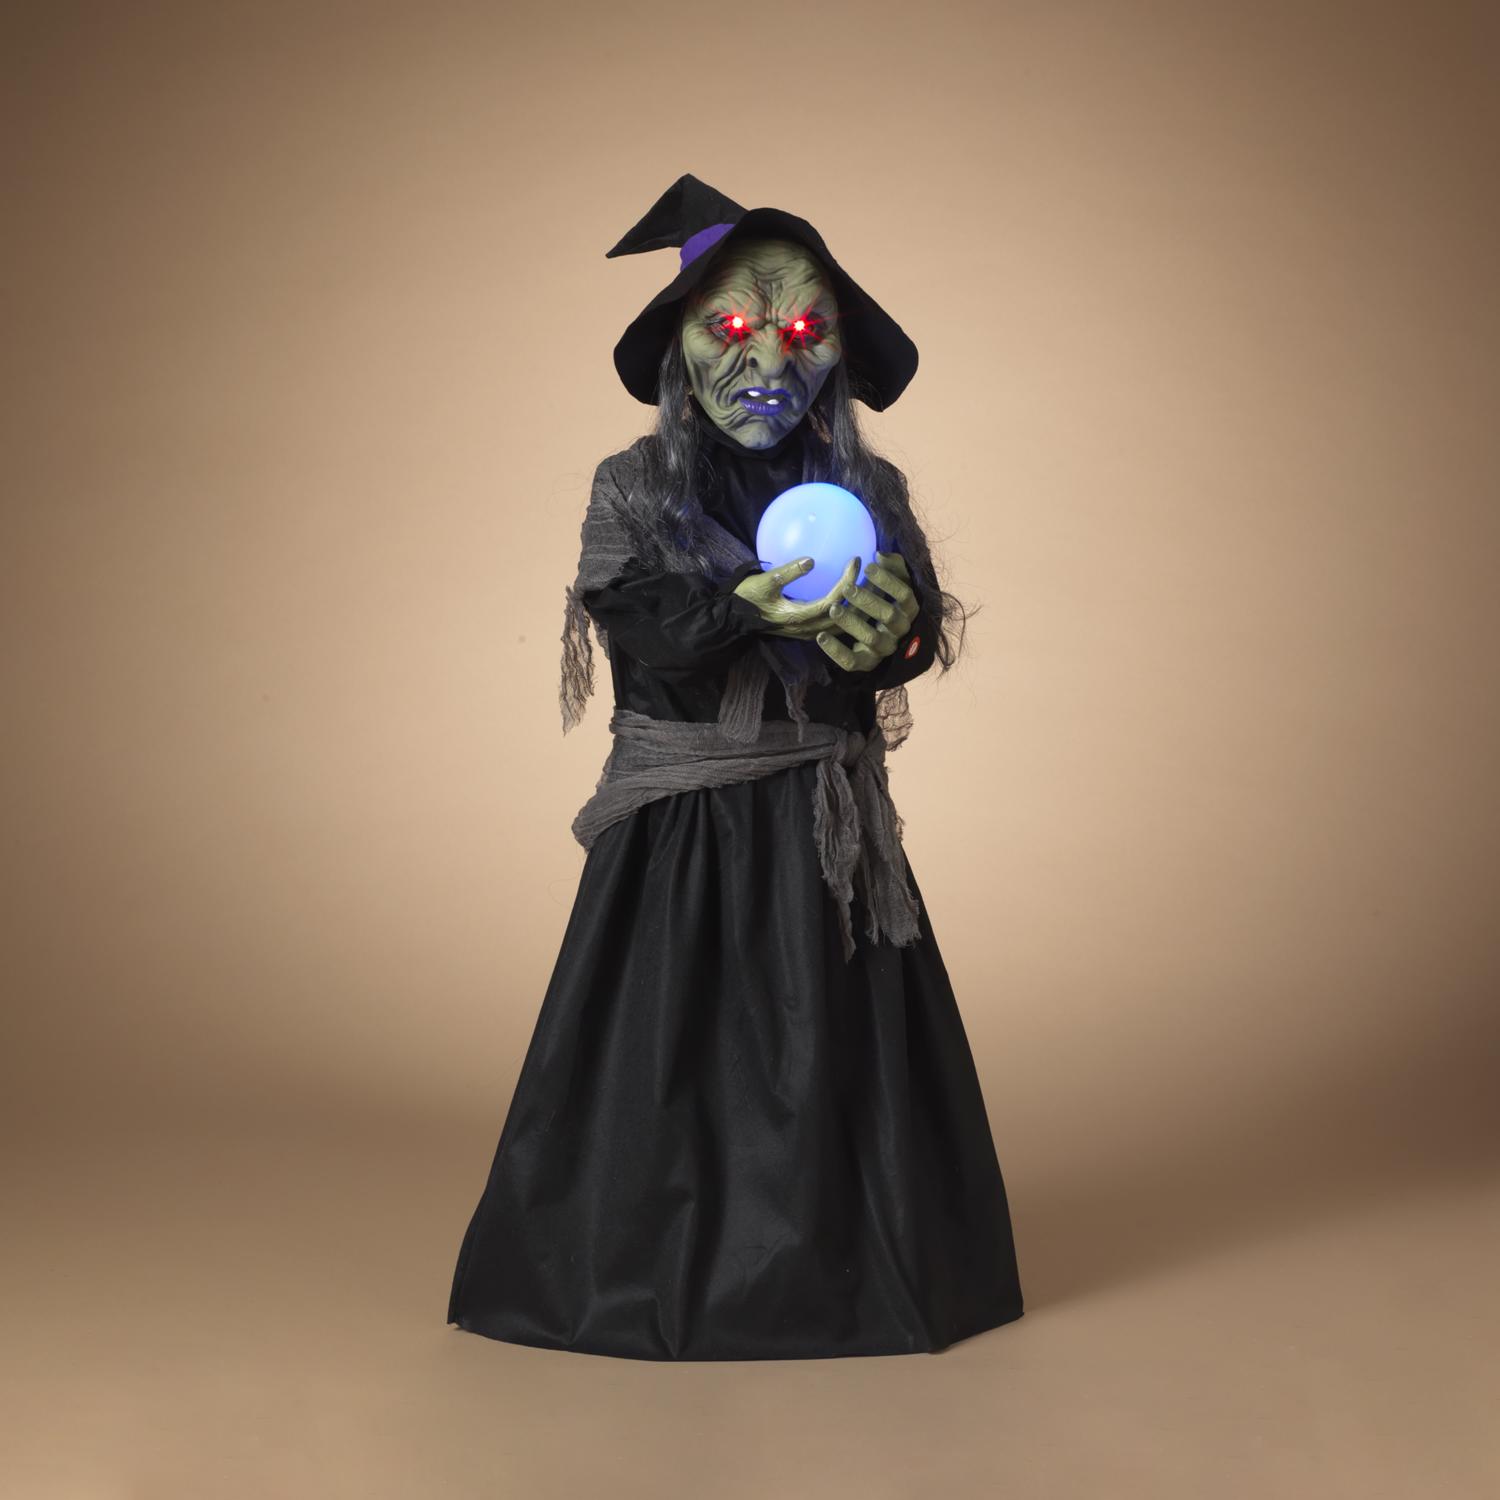 Photos - Other interior and decor Gerson 44 in. Lighted Animated Witch Halloween Decor 2603500